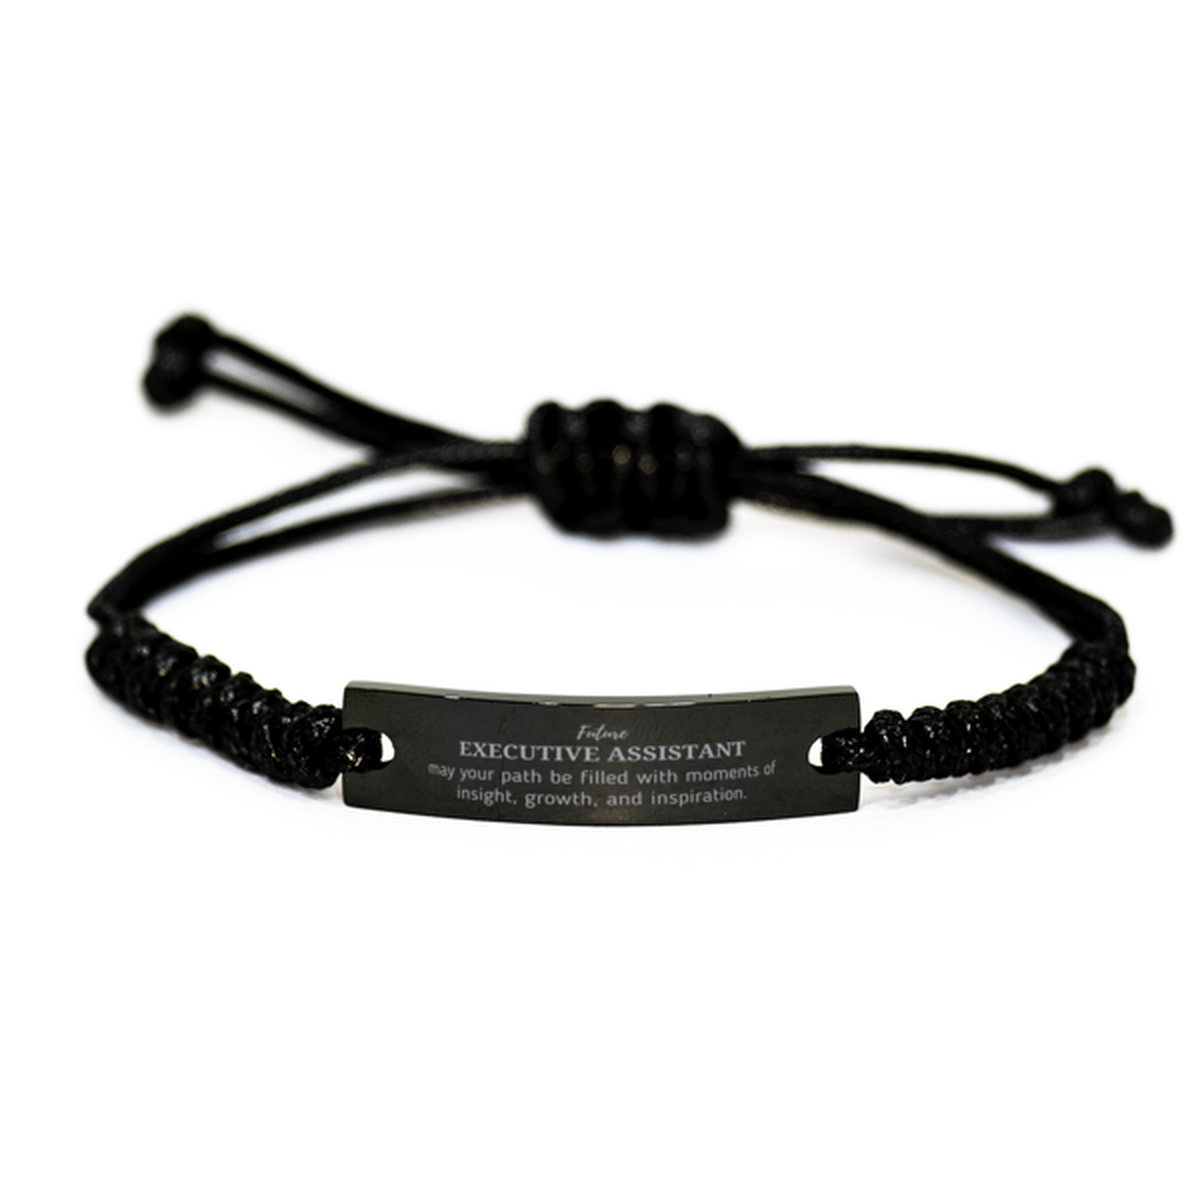 Future Executive Assistant Gifts, May your path be filled with moments of insight, Graduation Gifts for New Executive Assistant, Christmas Unique Black Rope Bracelet For Men, Women, Friends